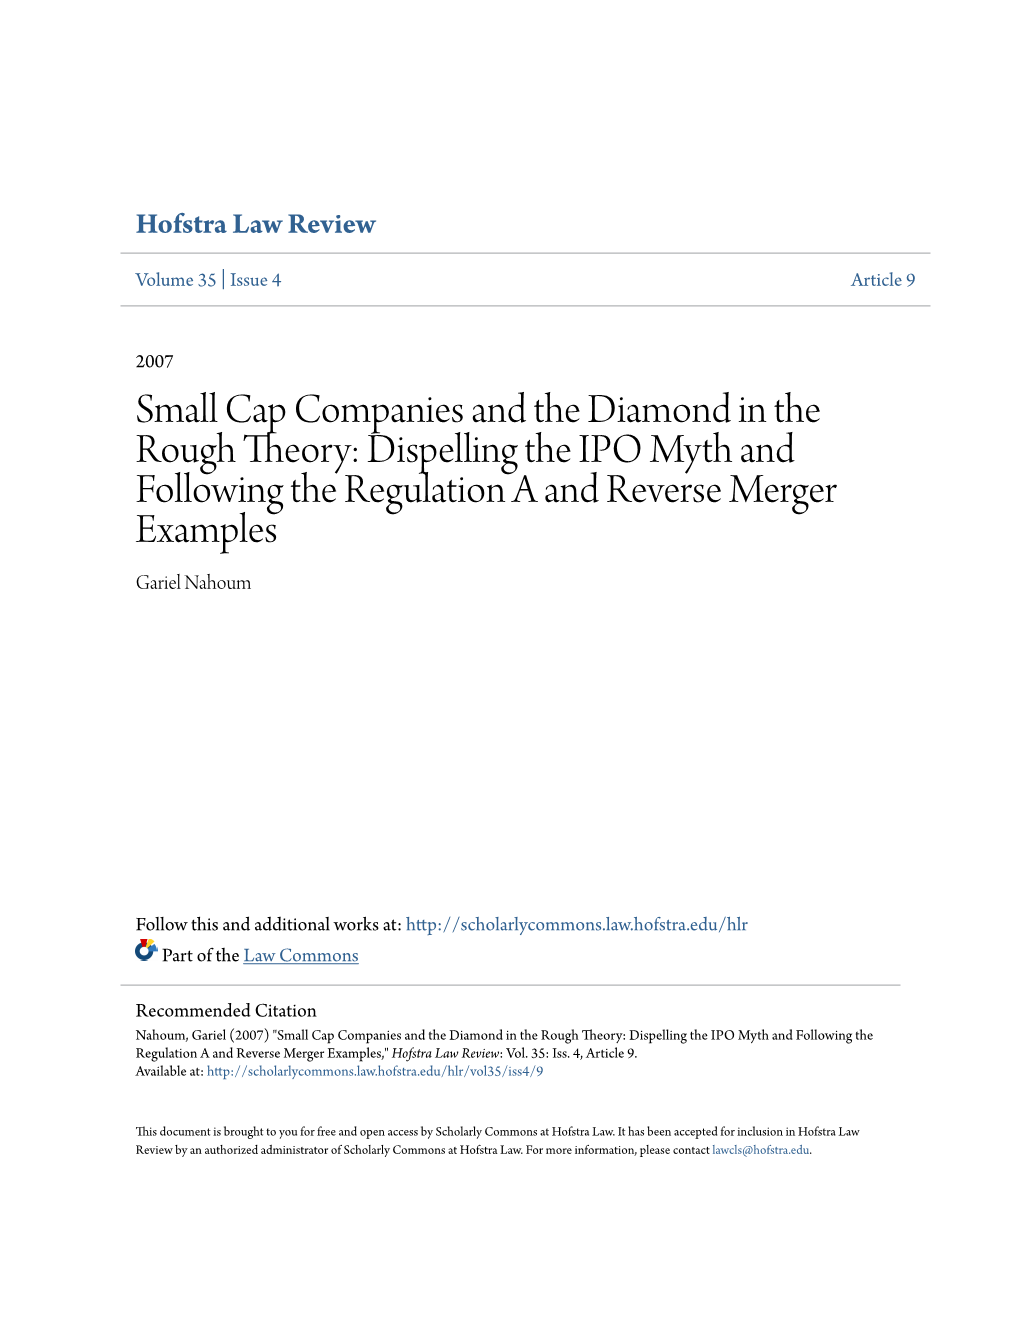 Small Cap Companies and the Diamond in the Rough Theory: Dispelling the IPO Myth and Following the Regulation a and Reverse Merger Examples Gariel Nahoum